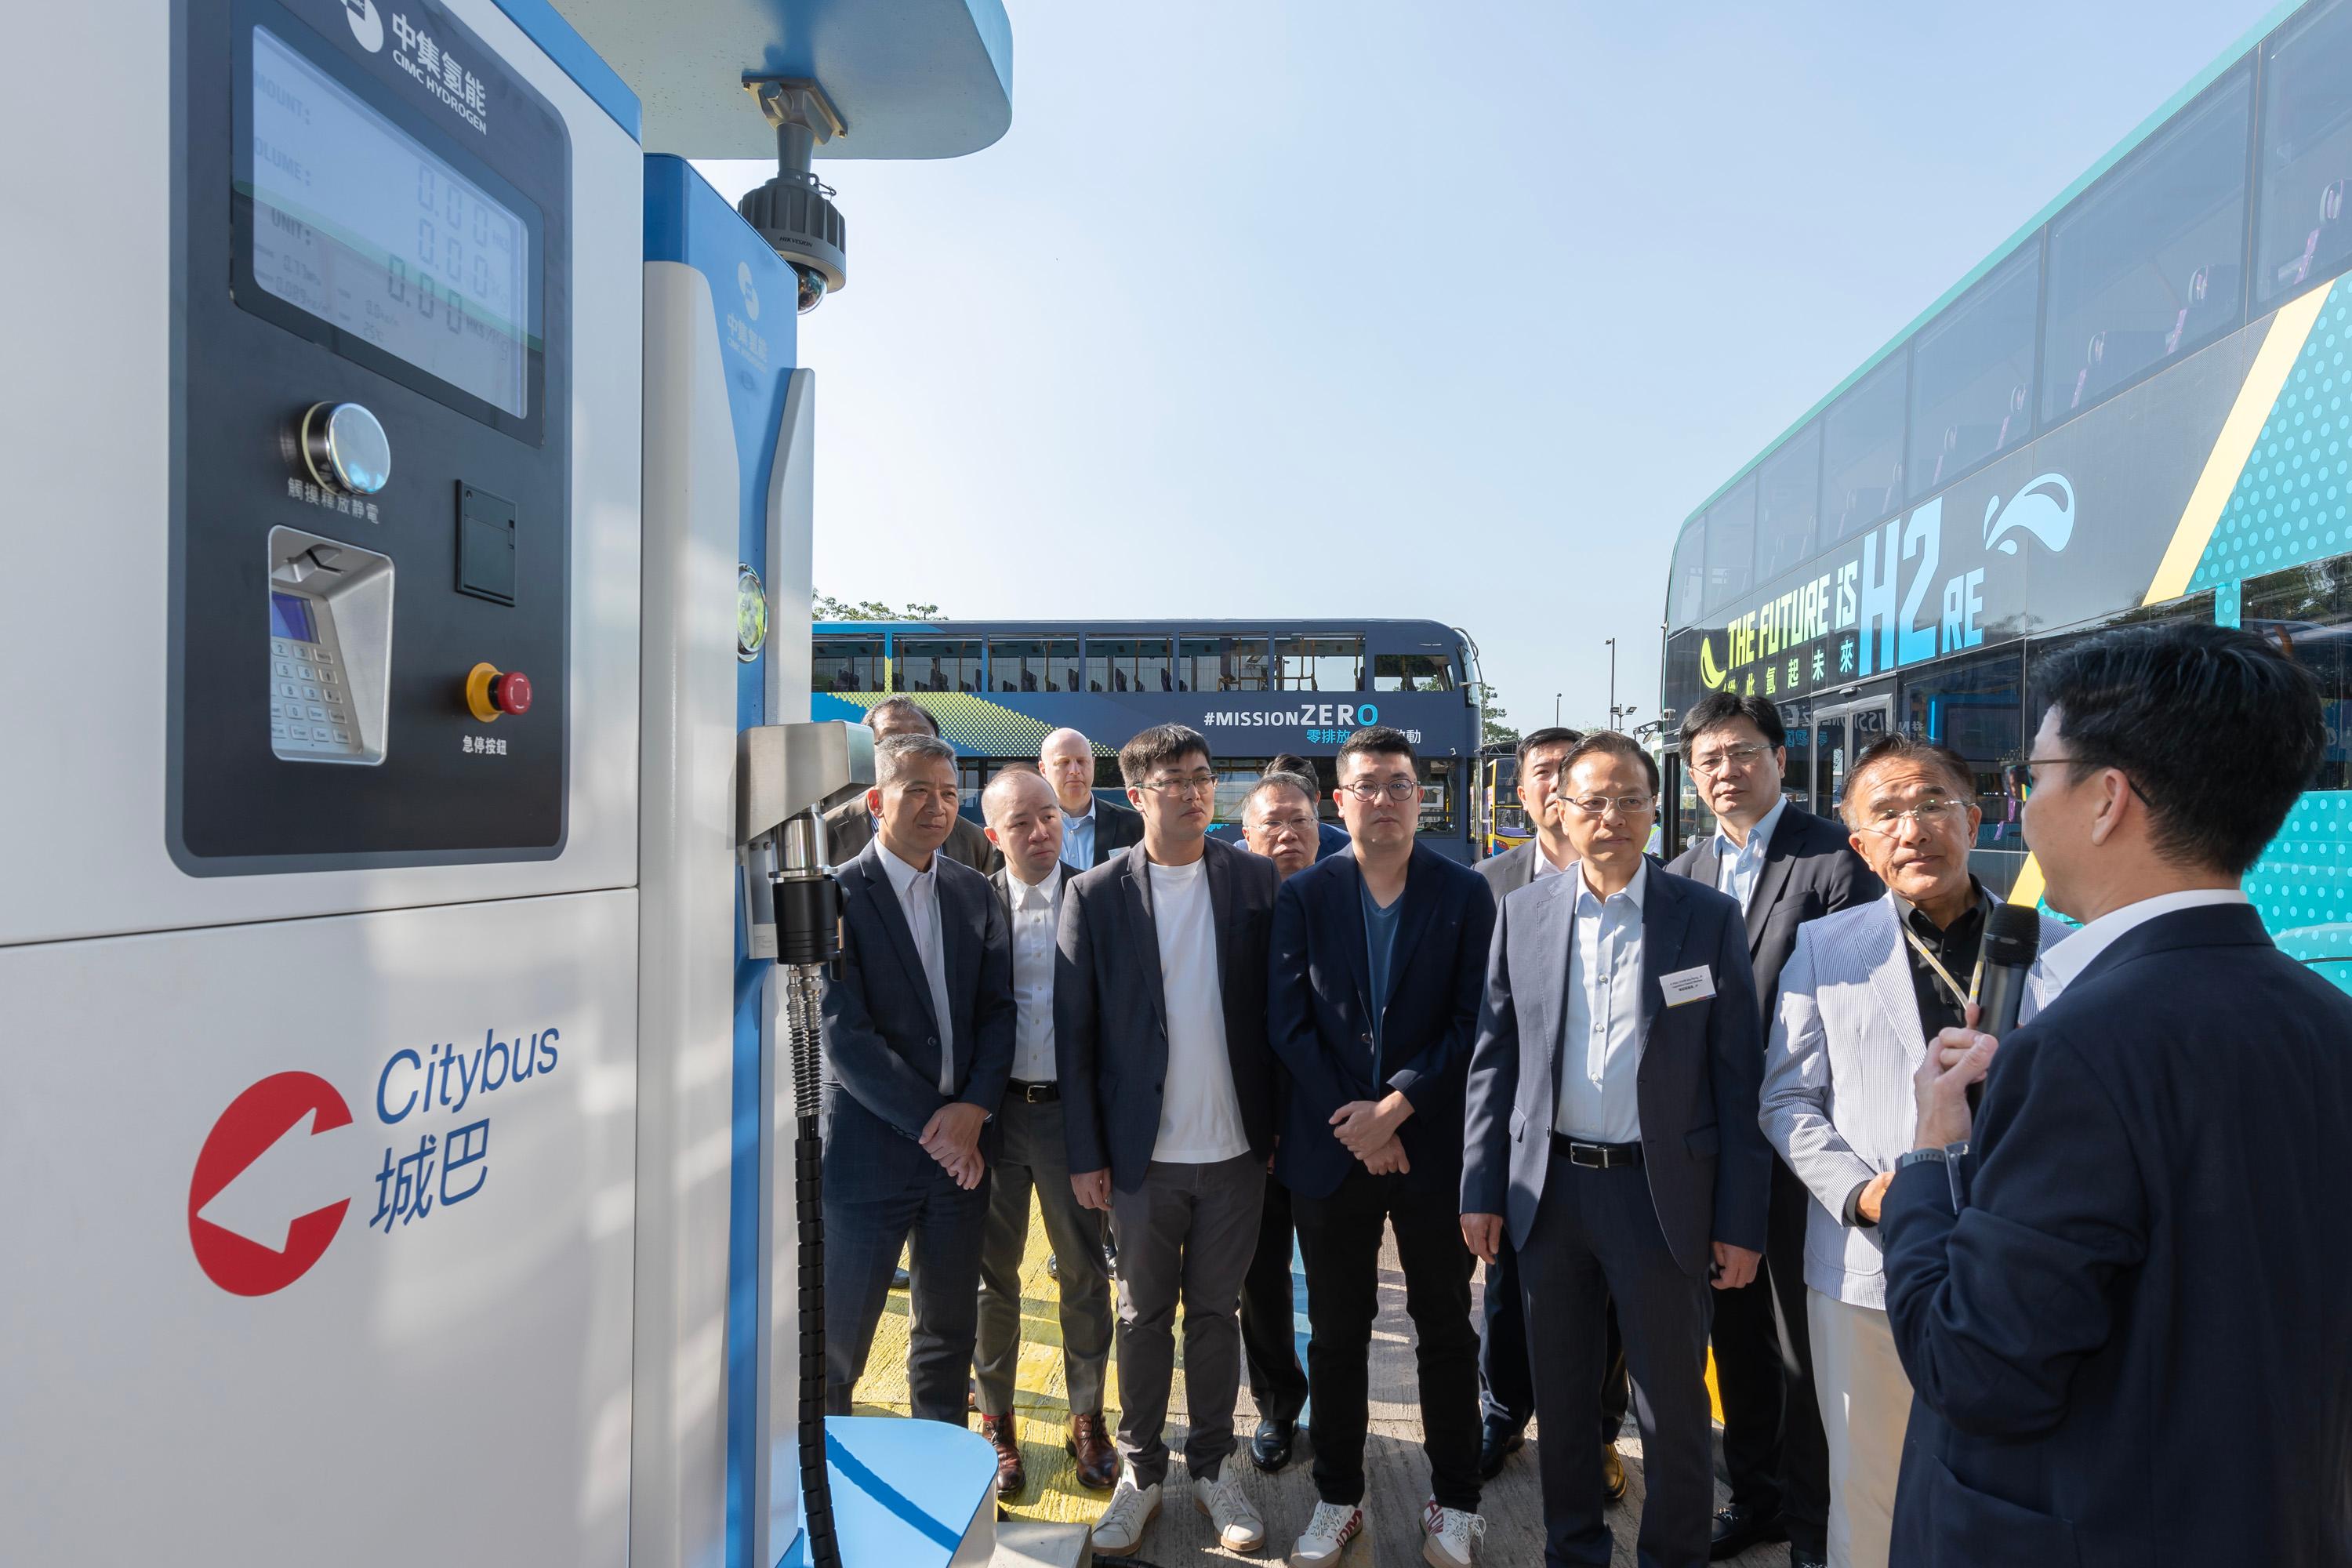 The Legislative Council Panel on Environmental Affairs and Panel on Transport conducted a joint visit to the Citybus Hydrogen Refuelling Station and its hydrogen bus today (December 12). Photo shows Members observing Hong Kong's first hydrogen refuelling station.